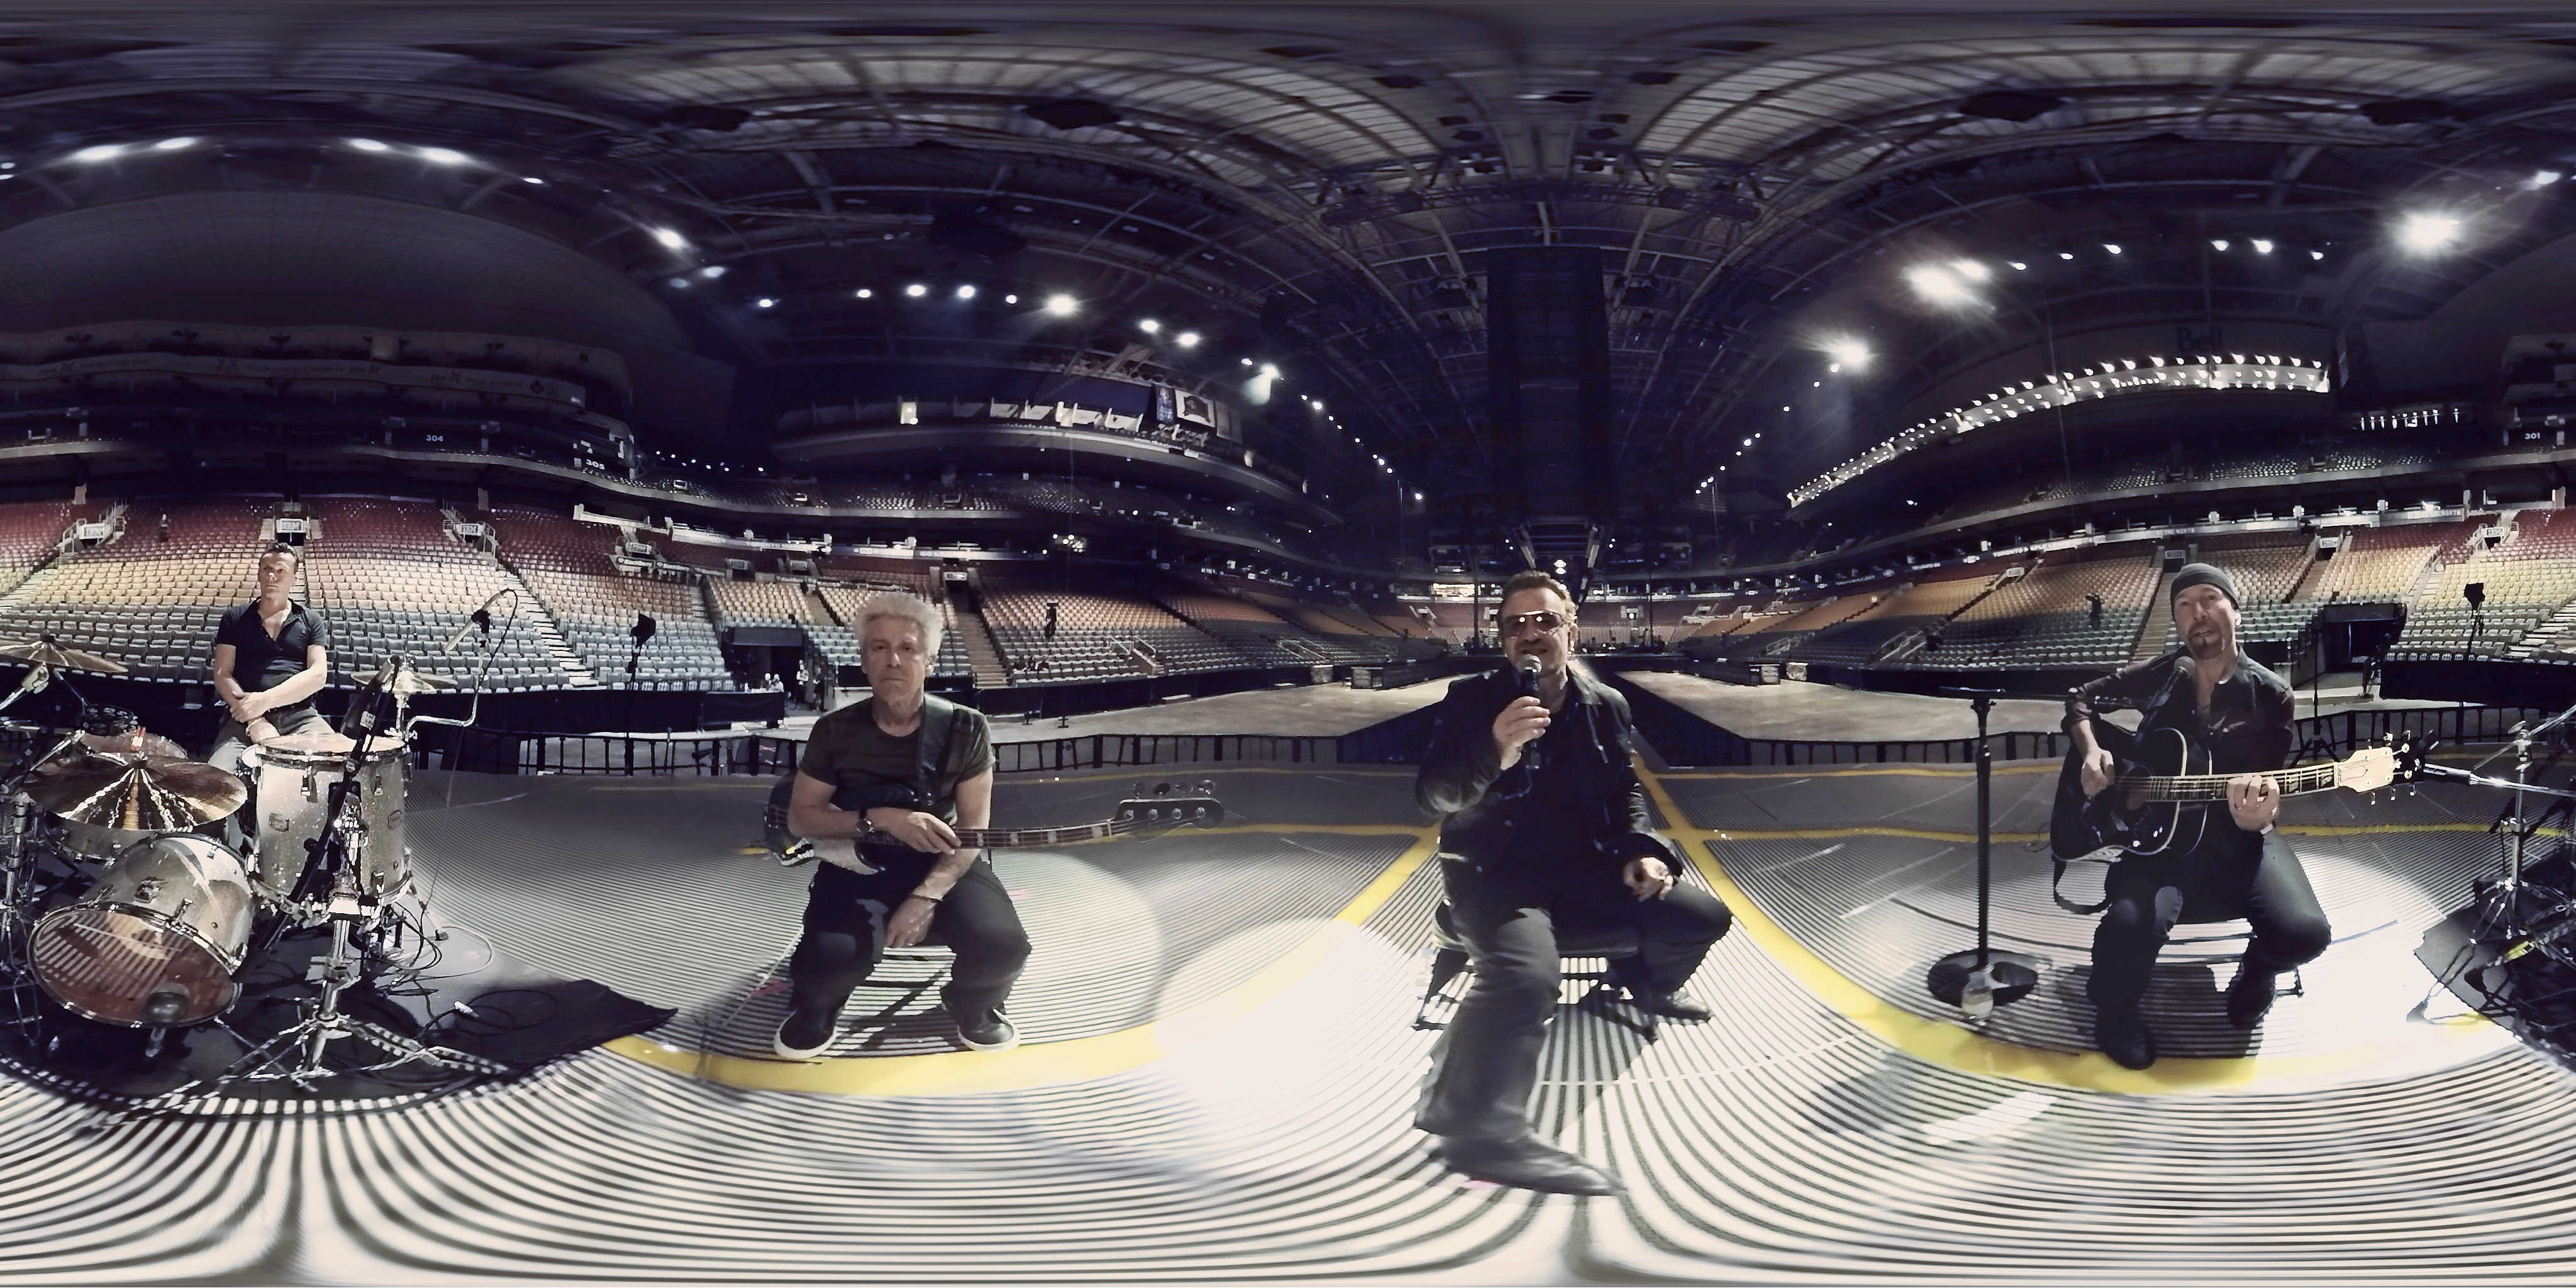 U2's VR music video feels like Bono is singing right at you.